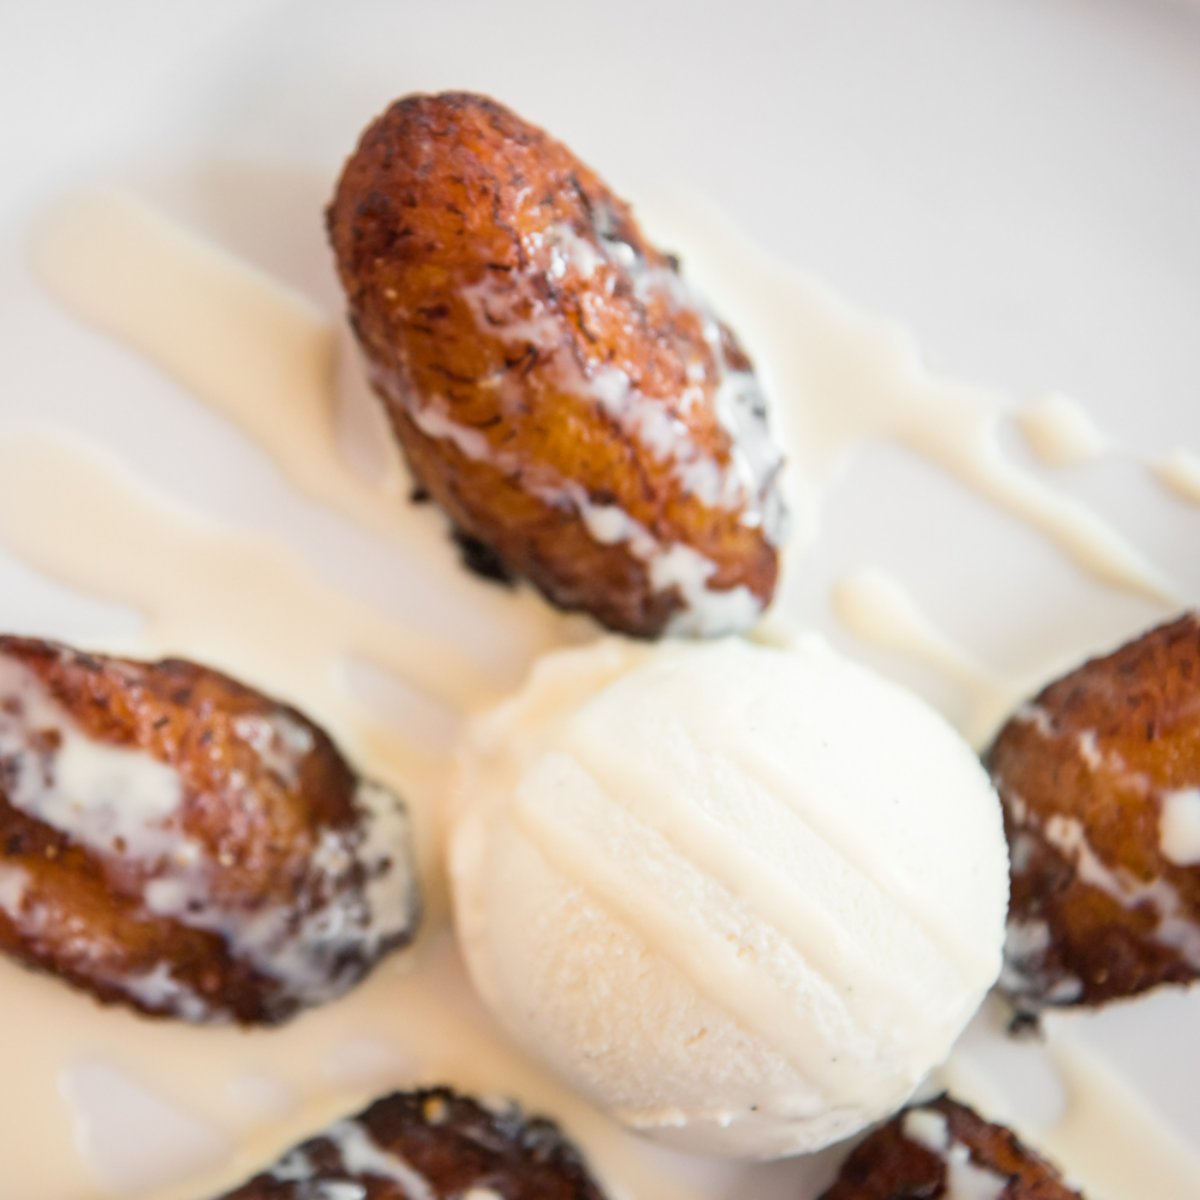 Weekends are made for a little something special -- our plantains with vanilla ice cream is just the thing! 😋 #LunaYSolMexicanRestaurant